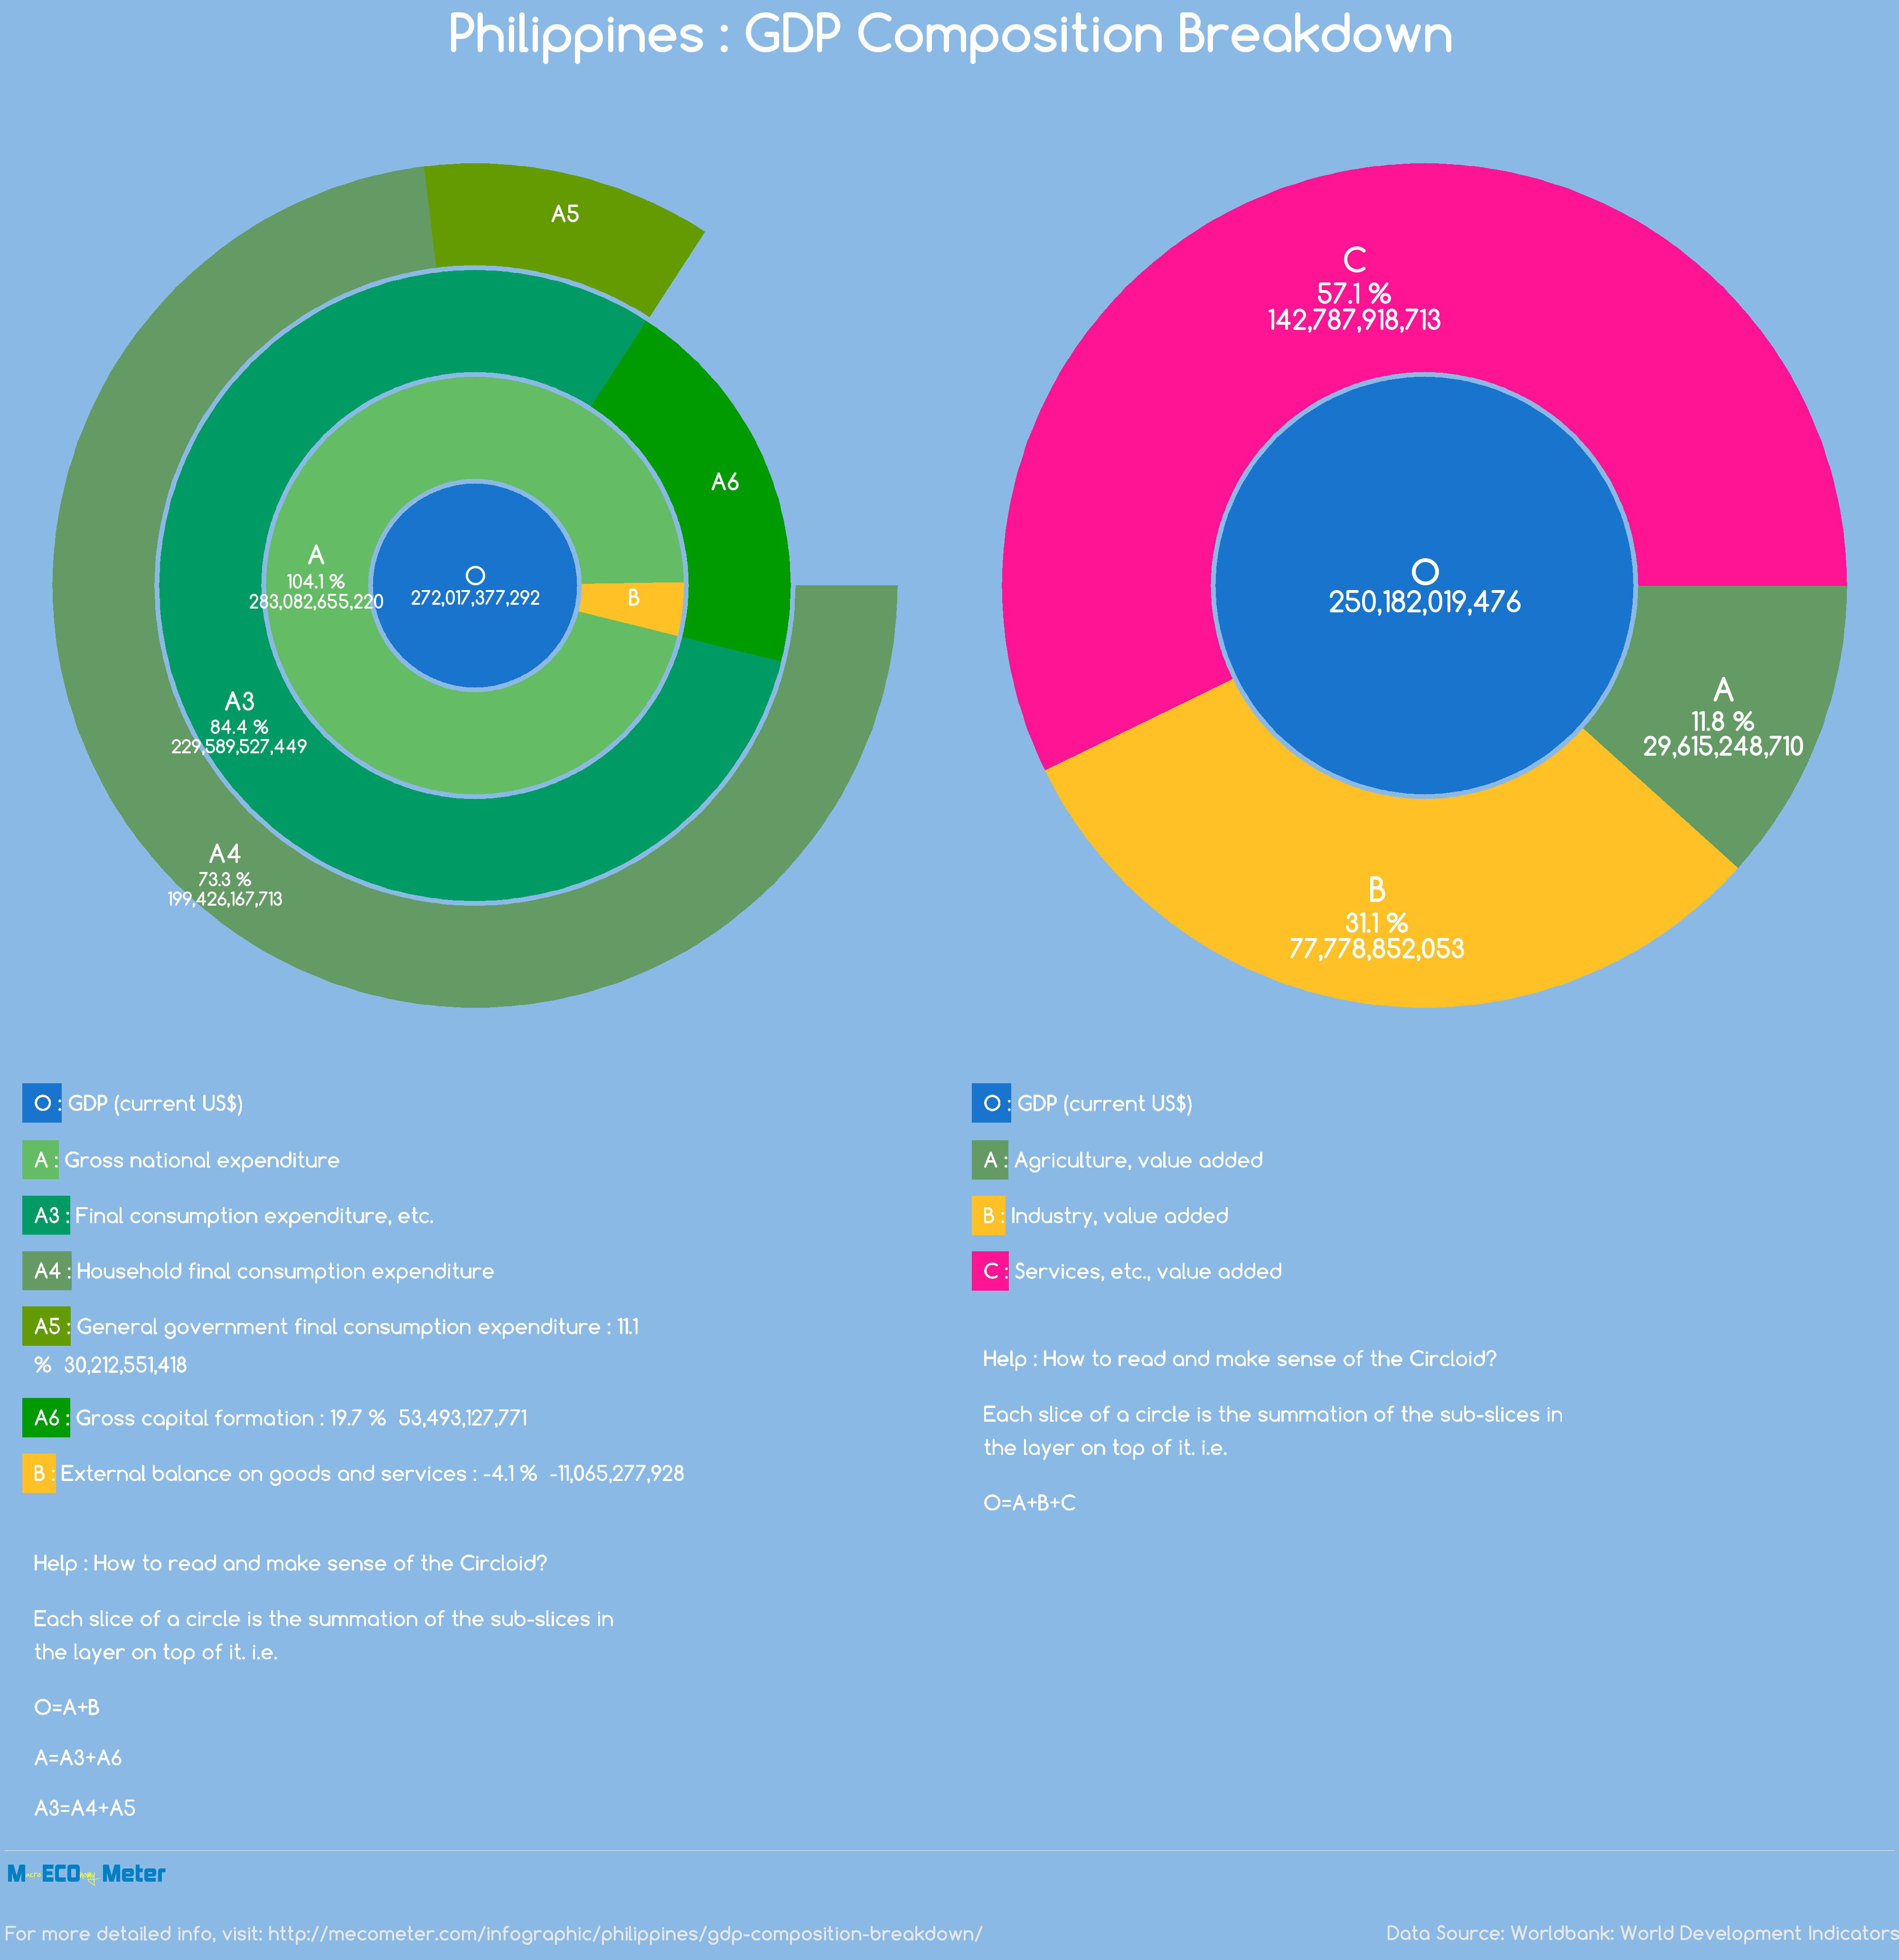 Philippines : GDP Composition Breakdown